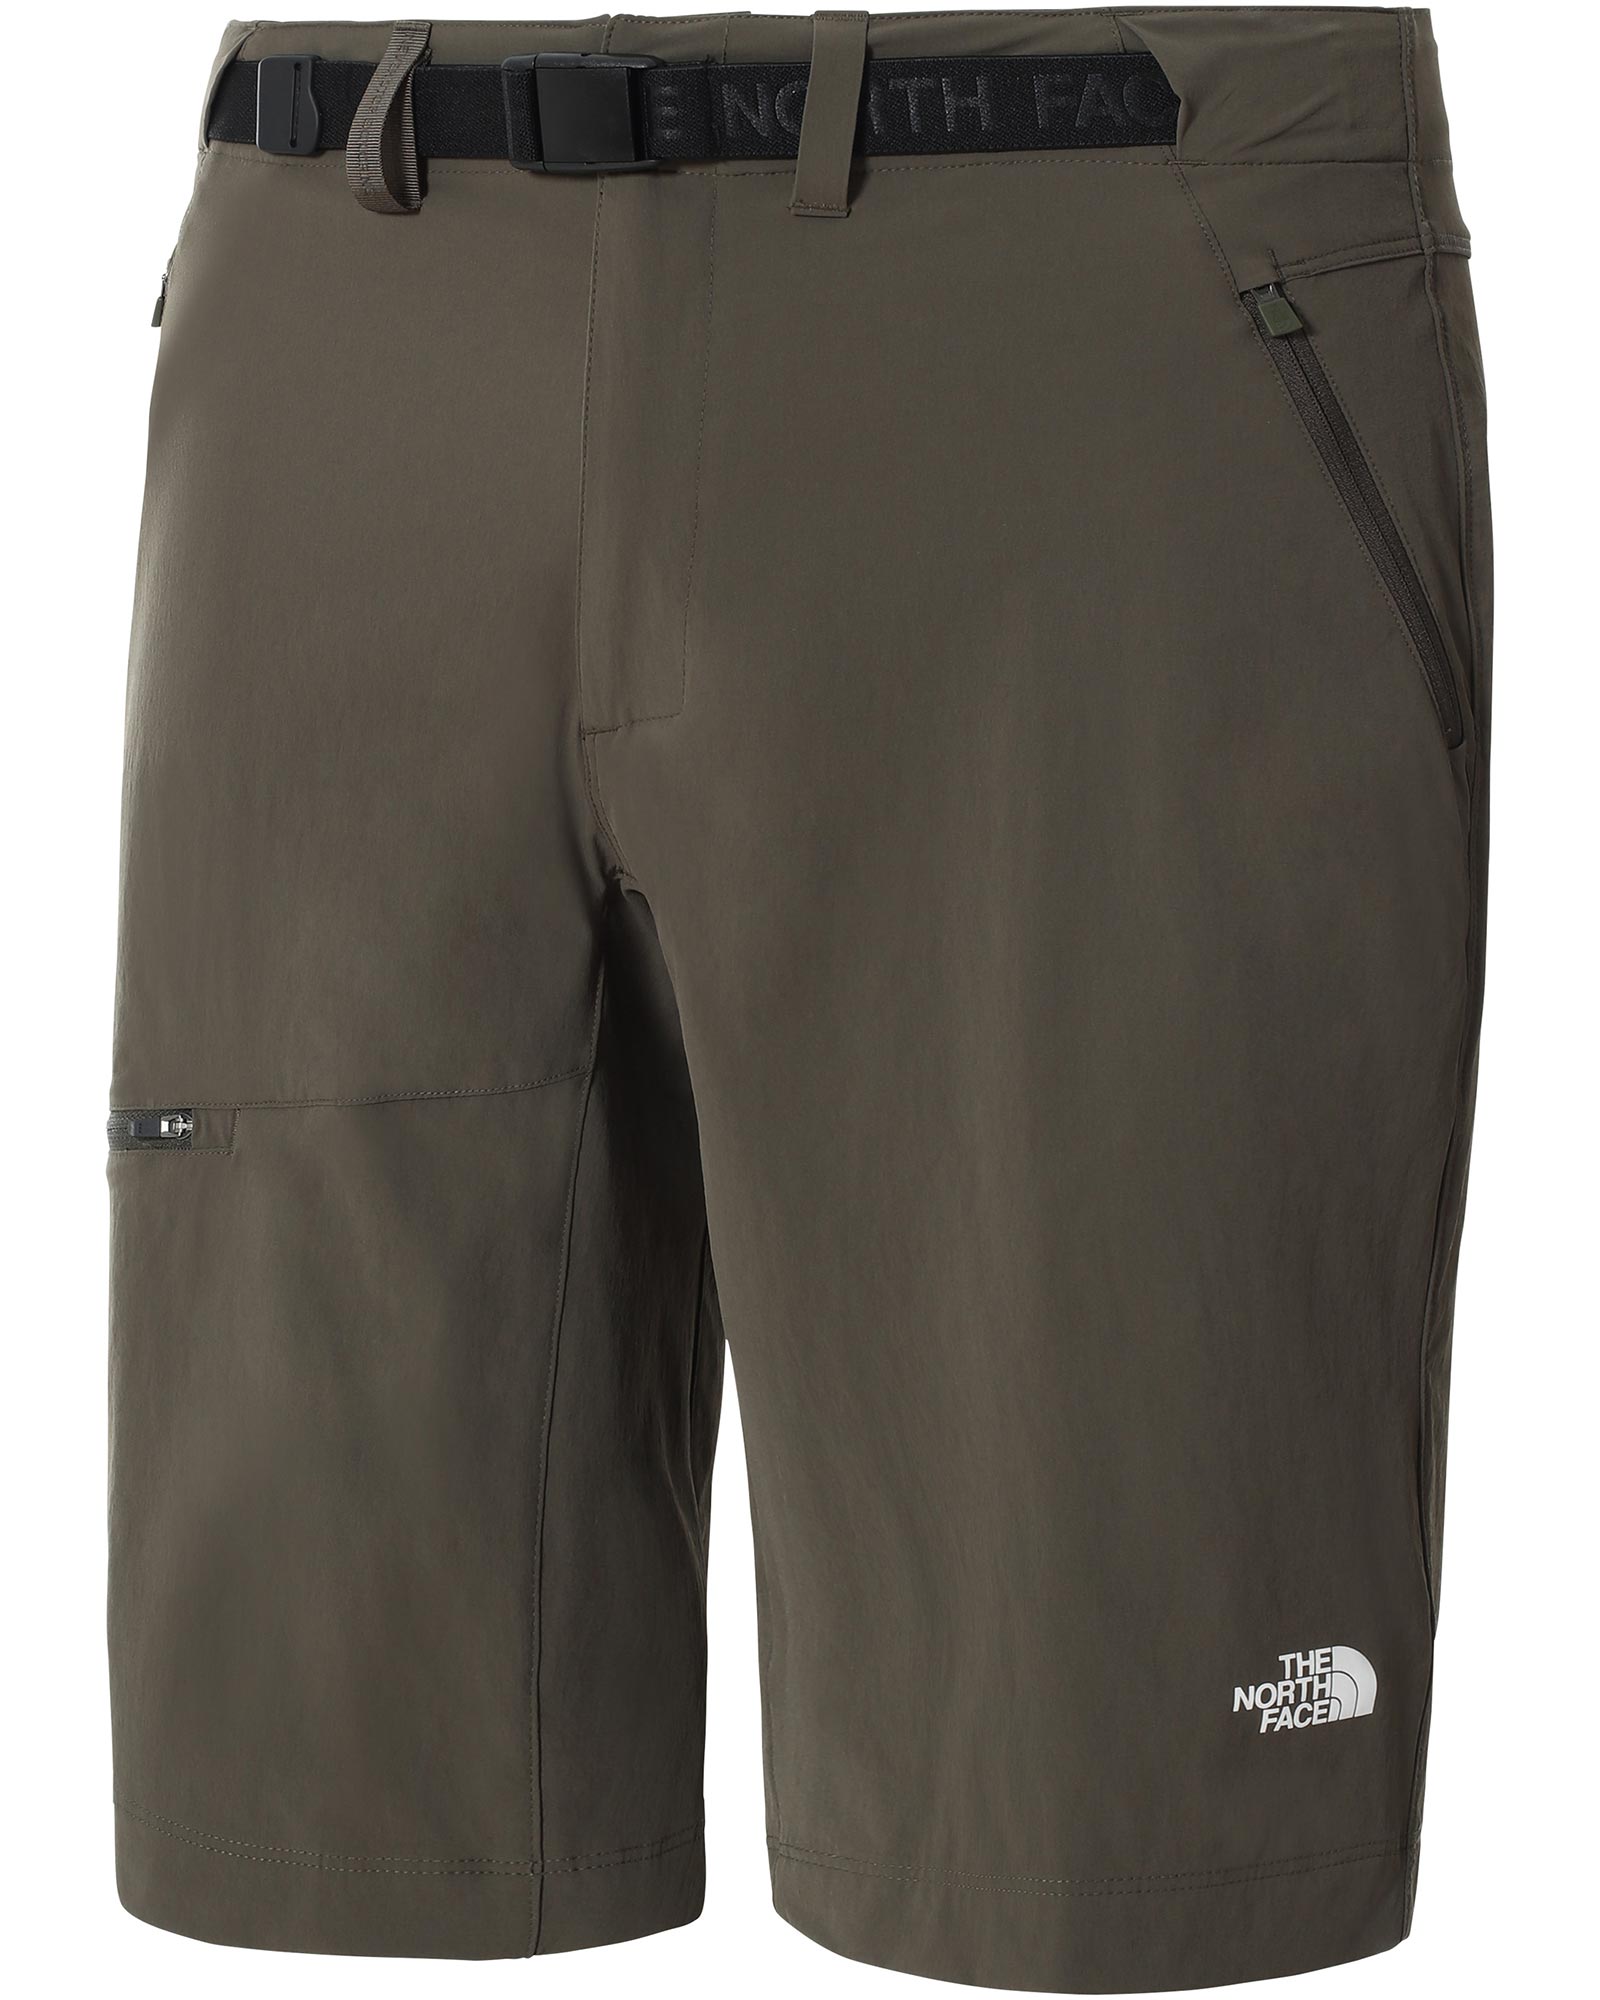 The North Face Speedlight Men’s Shorts - New Taupe Green 30"